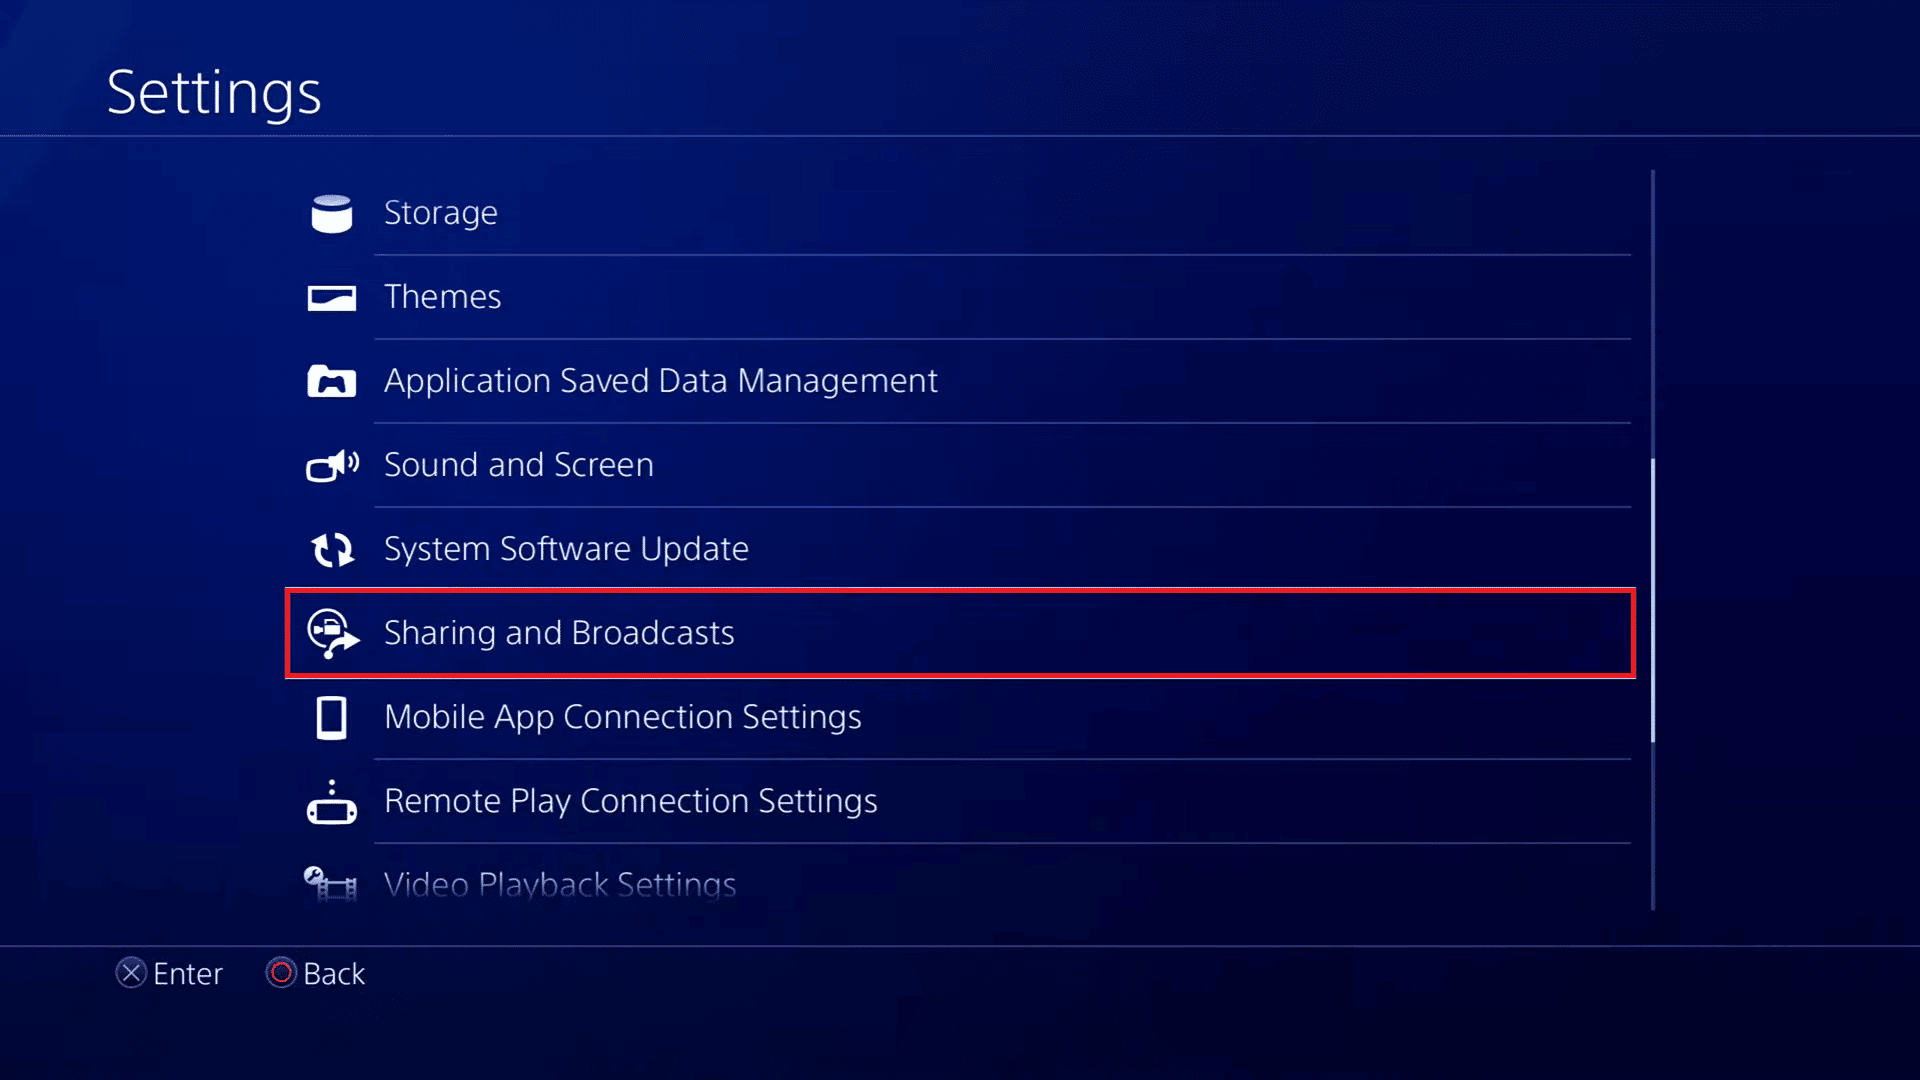 Sharings and Broadcasts Settings. Fix PS4 Error CE 42555 1 Issue